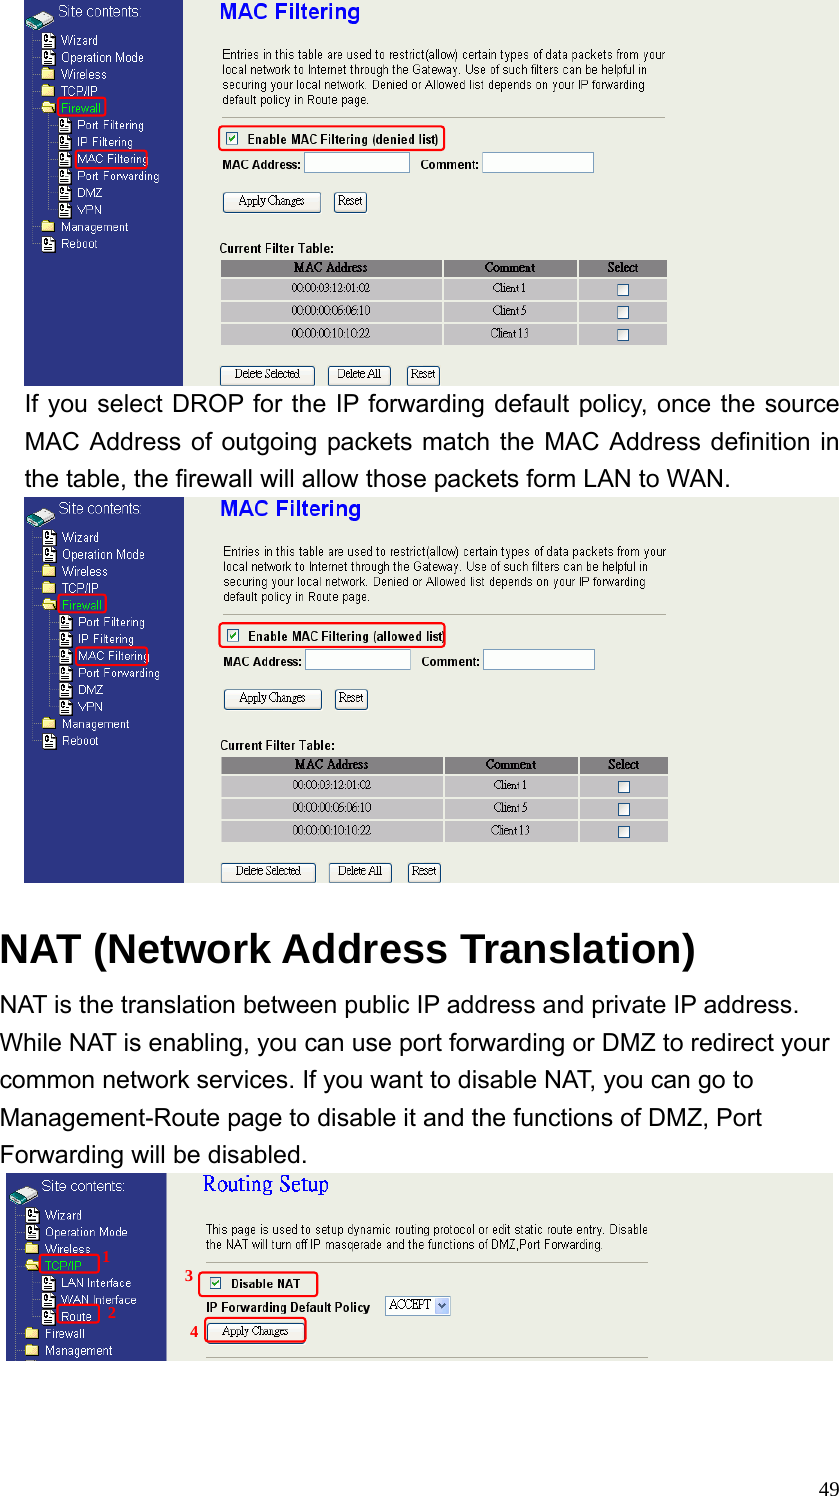  49 If you select DROP for the IP forwarding default policy, once the source MAC Address of outgoing packets match the MAC Address definition in the table, the firewall will allow those packets form LAN to WAN.   NAT (Network Address Translation)     NAT is the translation between public IP address and private IP address. While NAT is enabling, you can use port forwarding or DMZ to redirect your common network services. If you want to disable NAT, you can go to Management-Route page to disable it and the functions of DMZ, Port Forwarding will be disabled.      1 2 3 4 